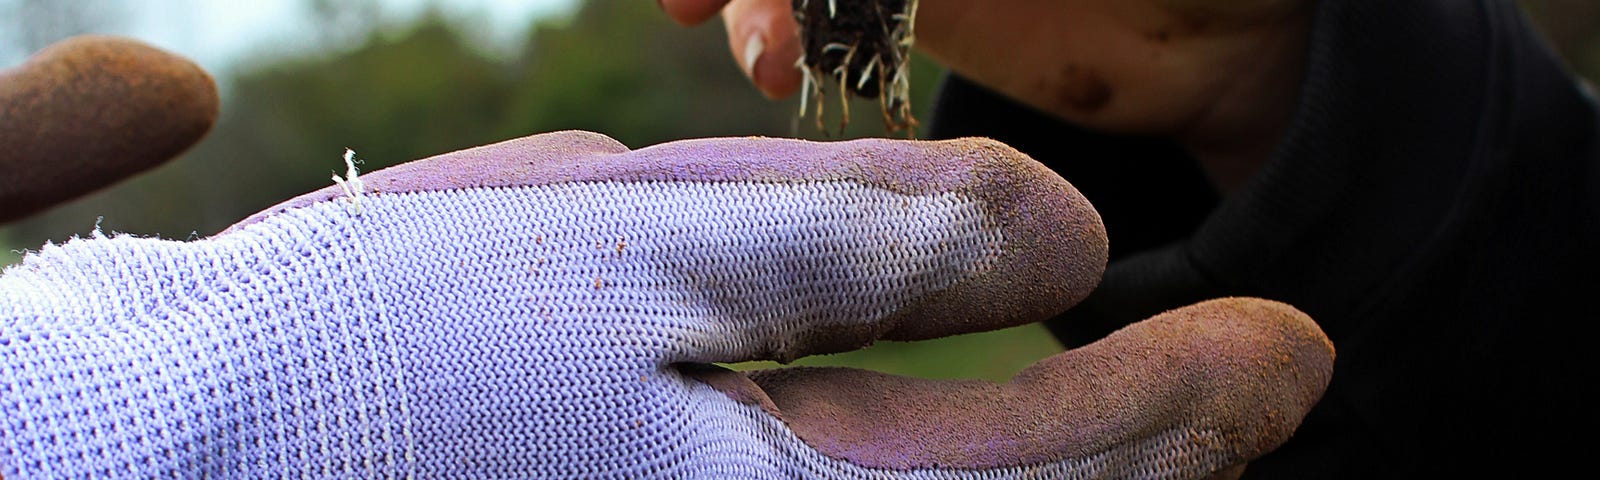 A gloved hand accepting a seedling